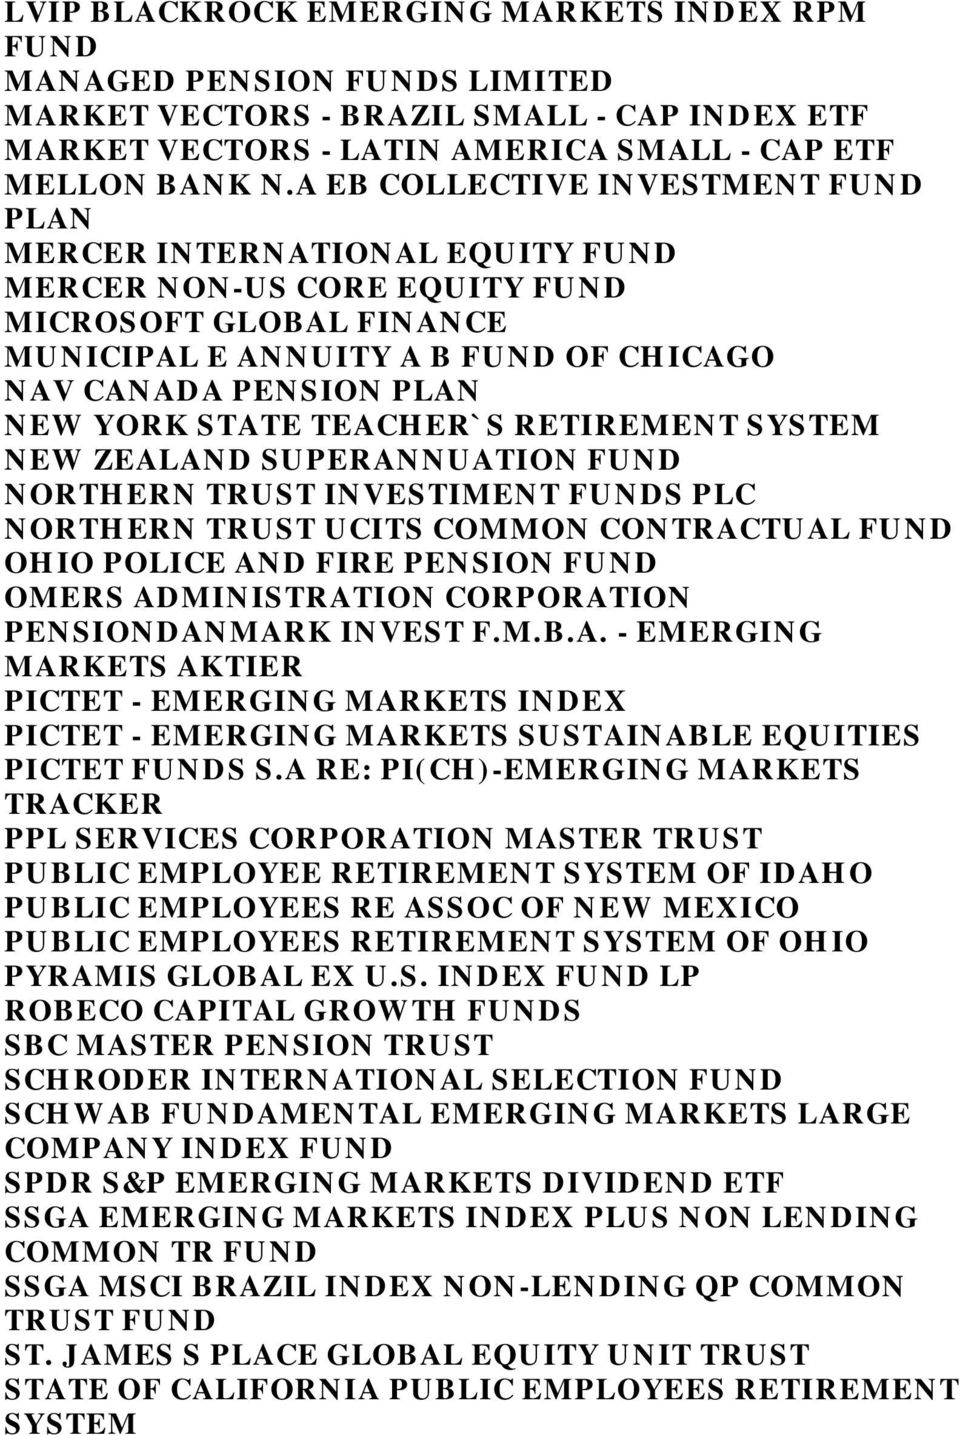 STATE TEACHER`S RETIREMENT SYSTEM NEW ZEALAND SUPERANNUATION FUND NORTHERN TRUST INVESTIMENT FUNDS PLC NORTHERN TRUST UCITS COMMON CONTRACTUAL FUND OHIO POLICE AND FIRE PENSION FUND OMERS